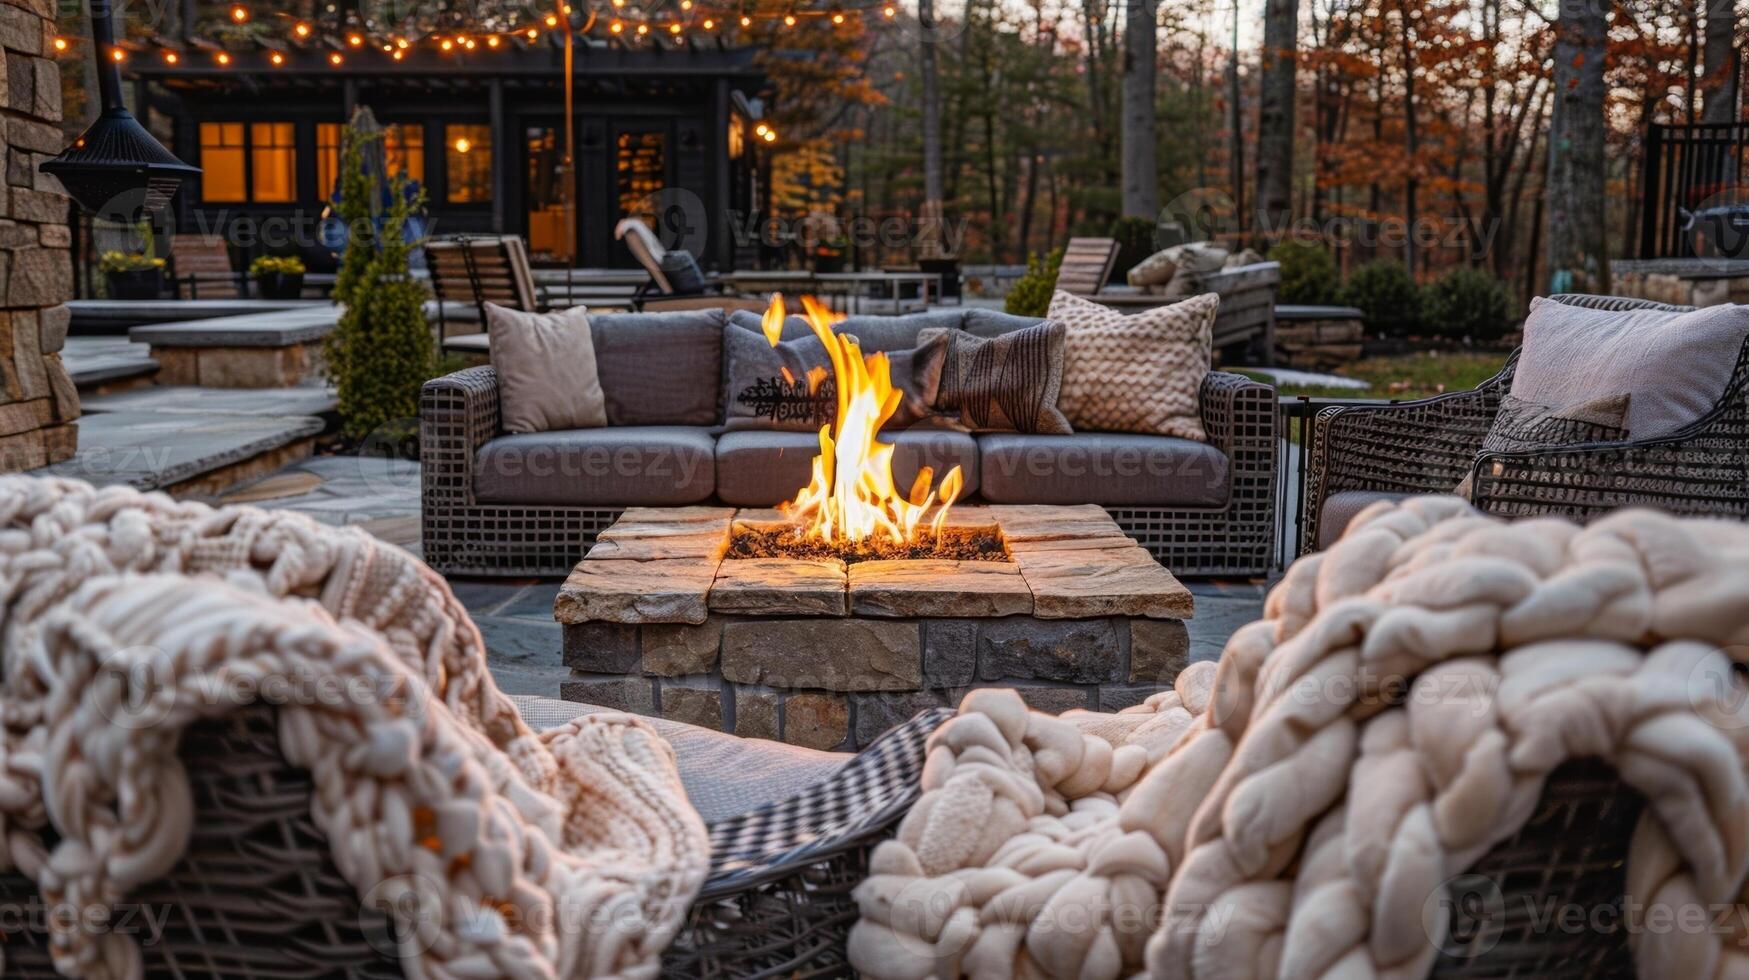 The cozy seating area around the fire pit is adorned with fluffy blankets perfect for snuggling up on a chilly evening. 2d flat cartoon photo